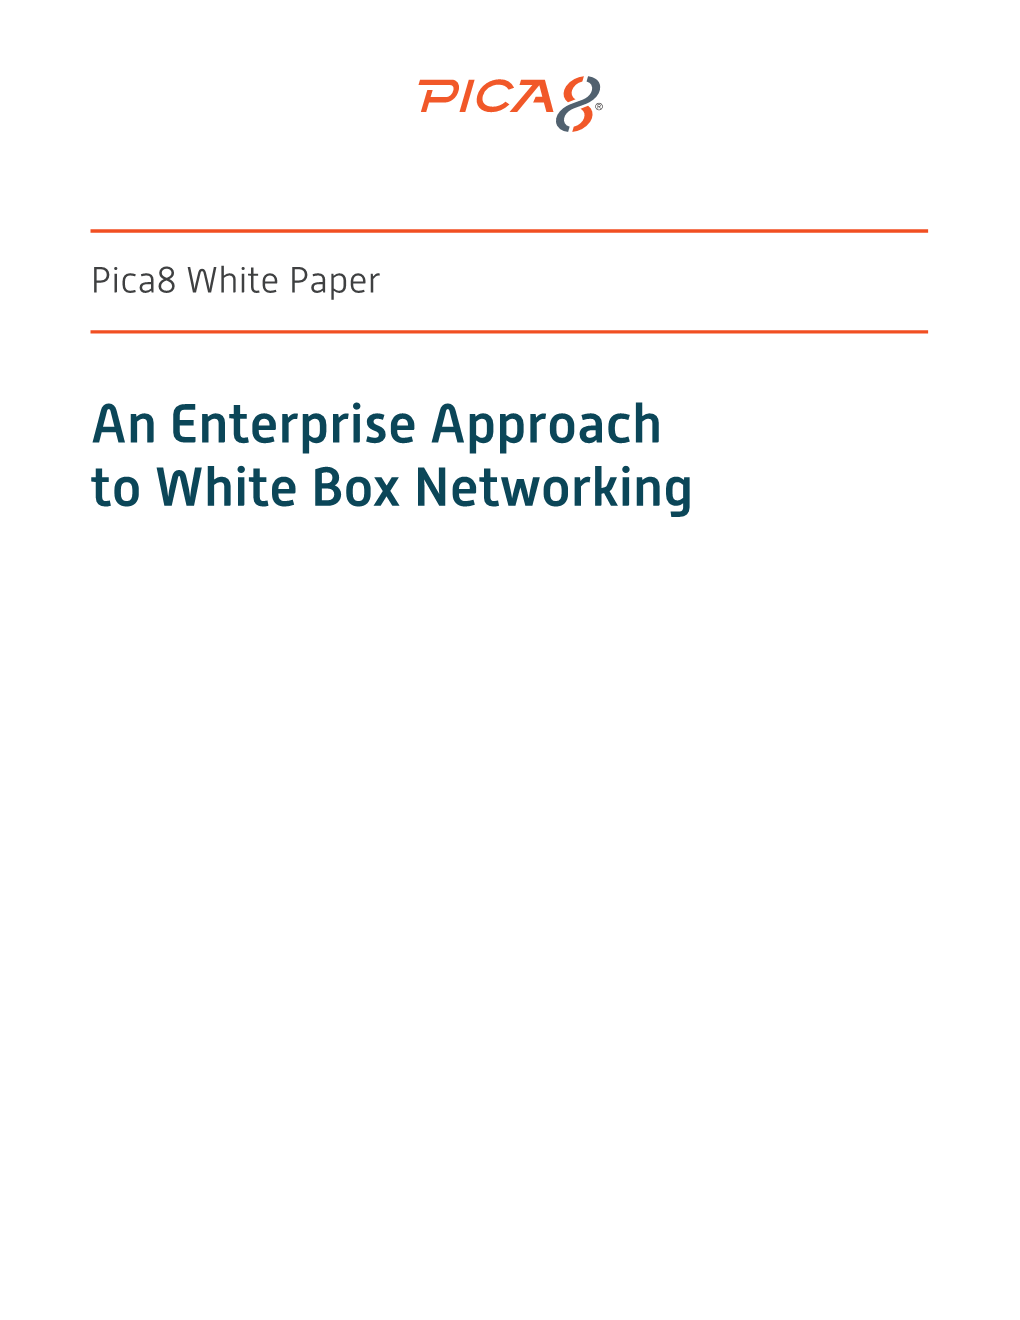 An Enterprise Approach to White Box Networking Contents